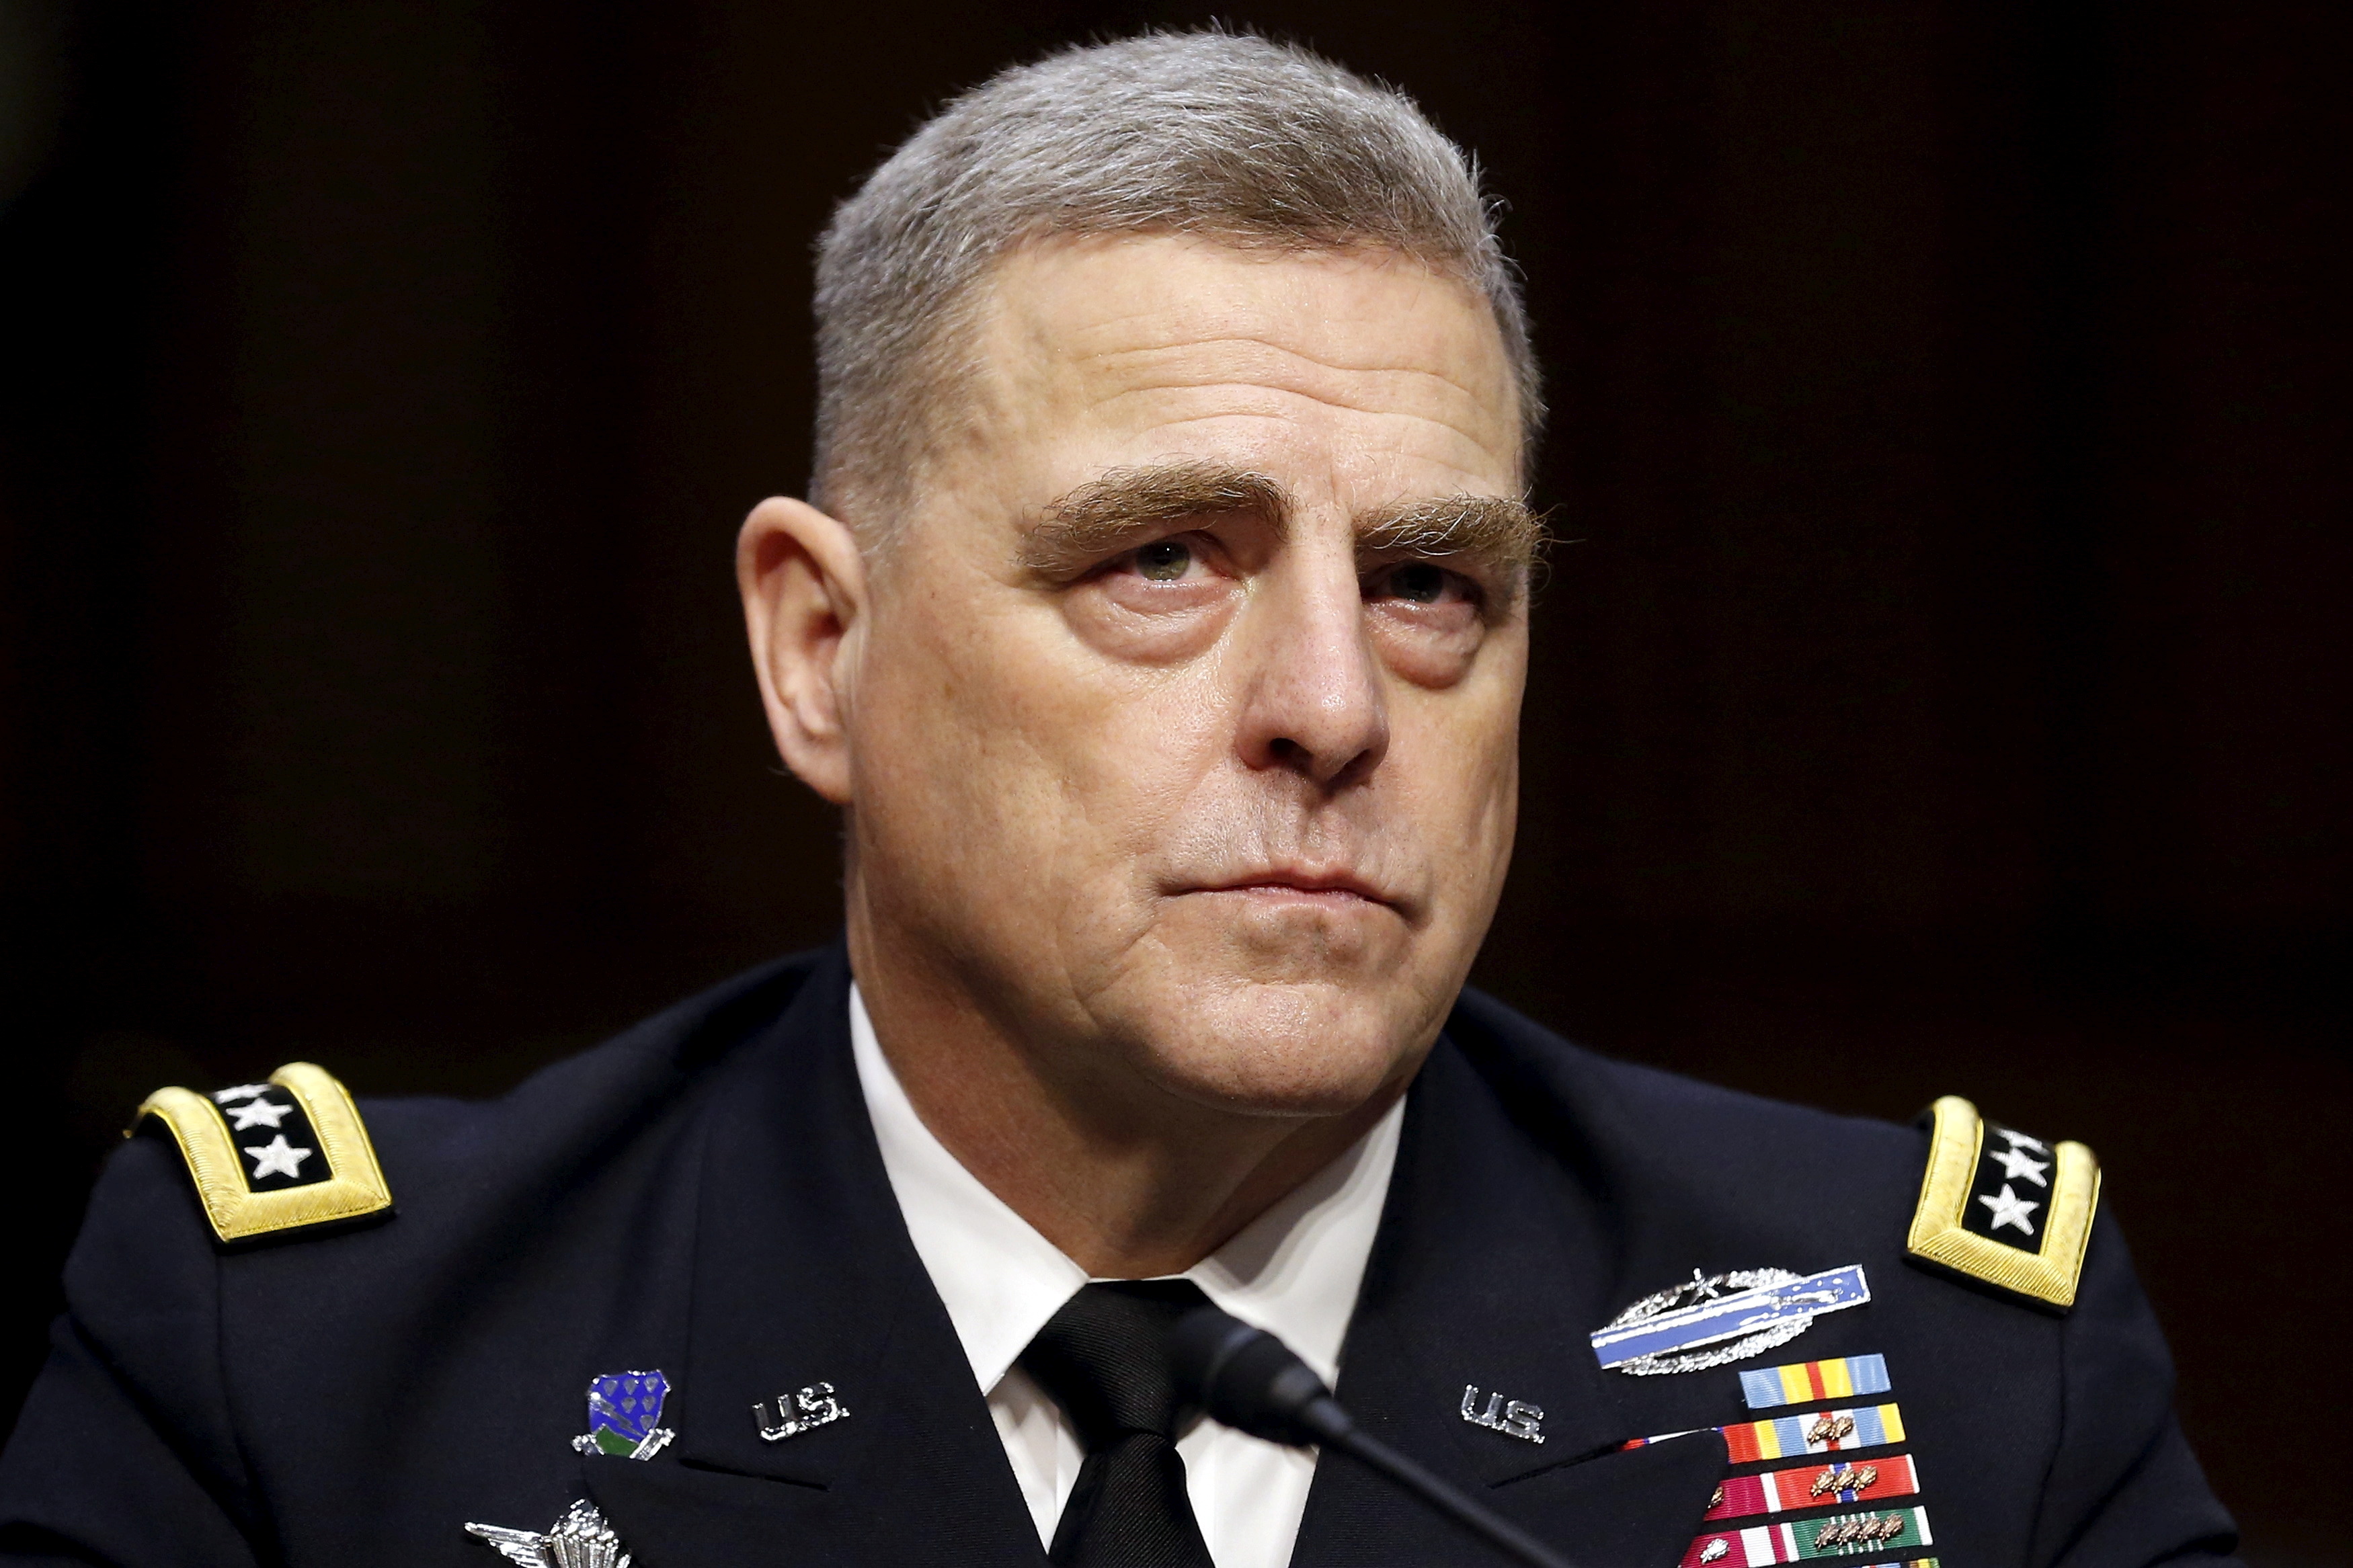 U.S. Army General Milley testifies at a Senate Armed Services Committee hearing on his nomination to become the Army's chief of staff, on Capitol Hill in Washington